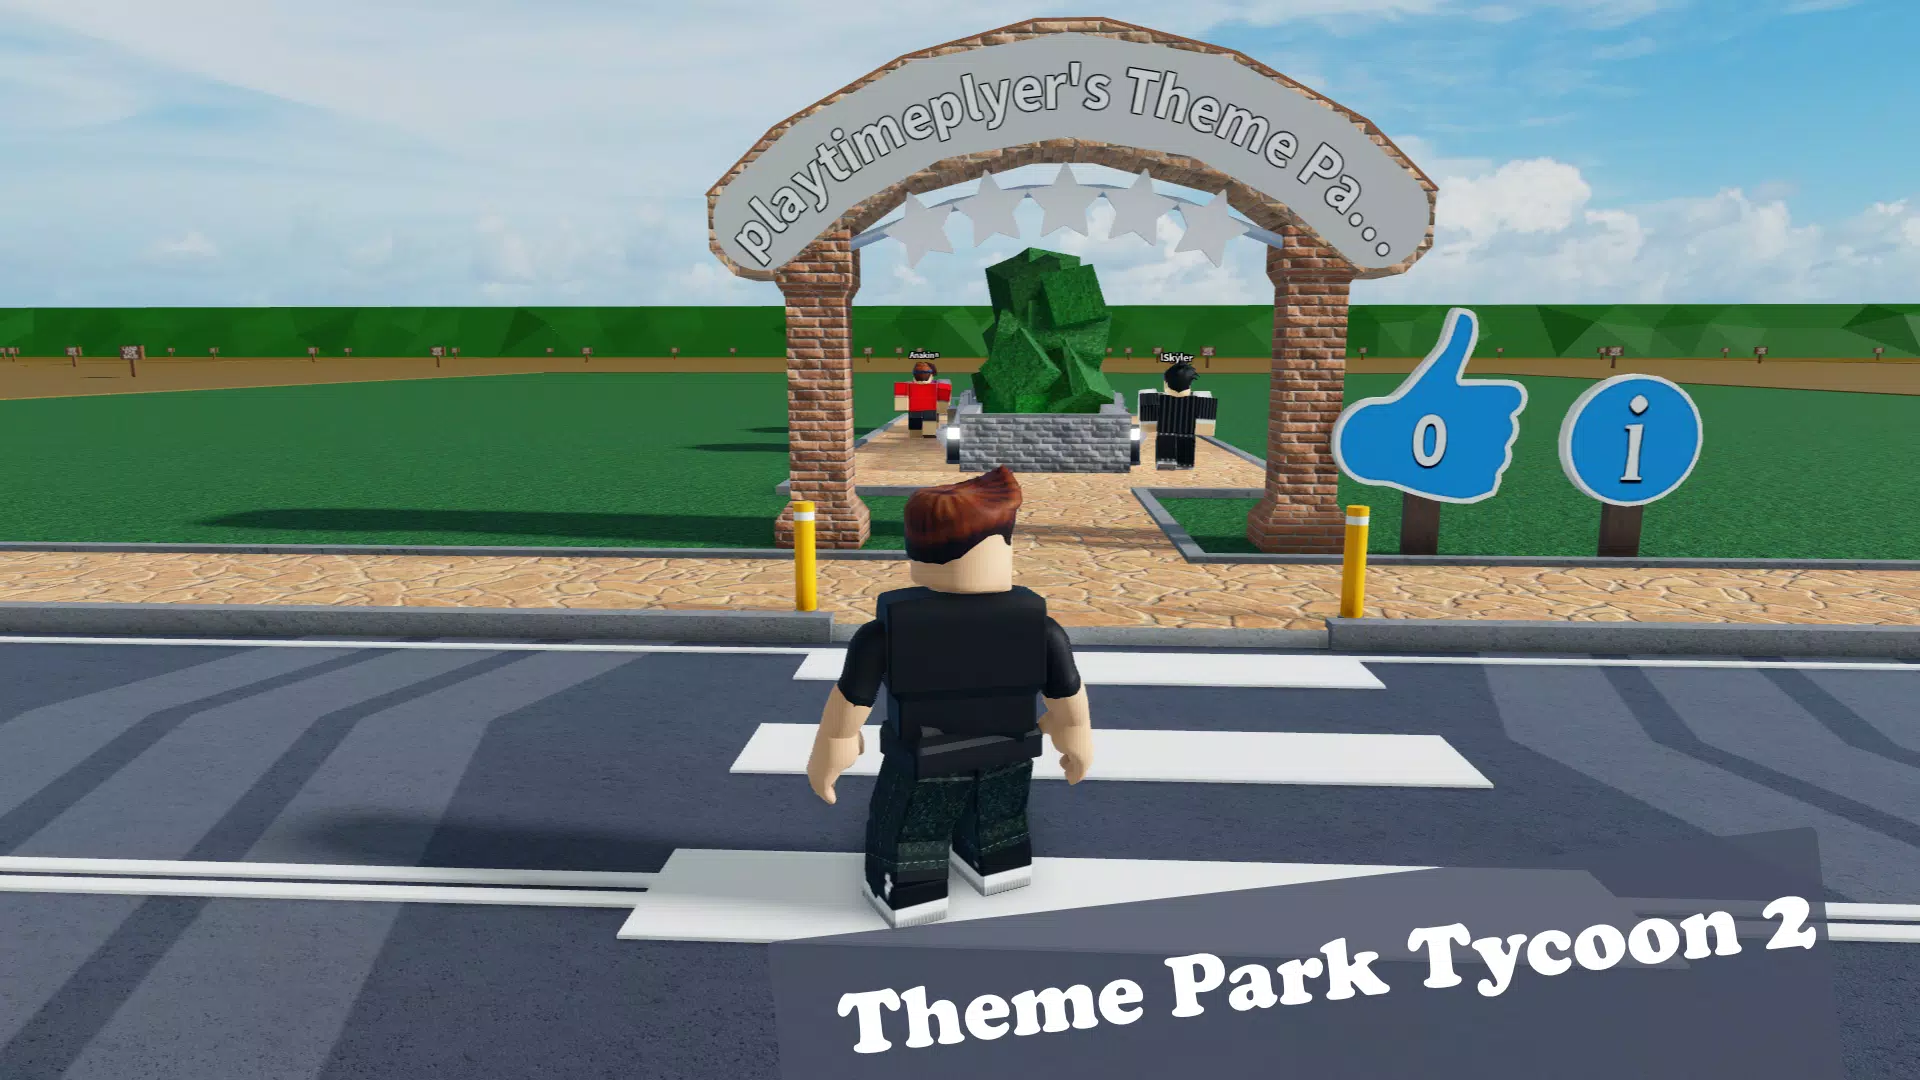 Roblox Themes for Google Chrome - Extension Download